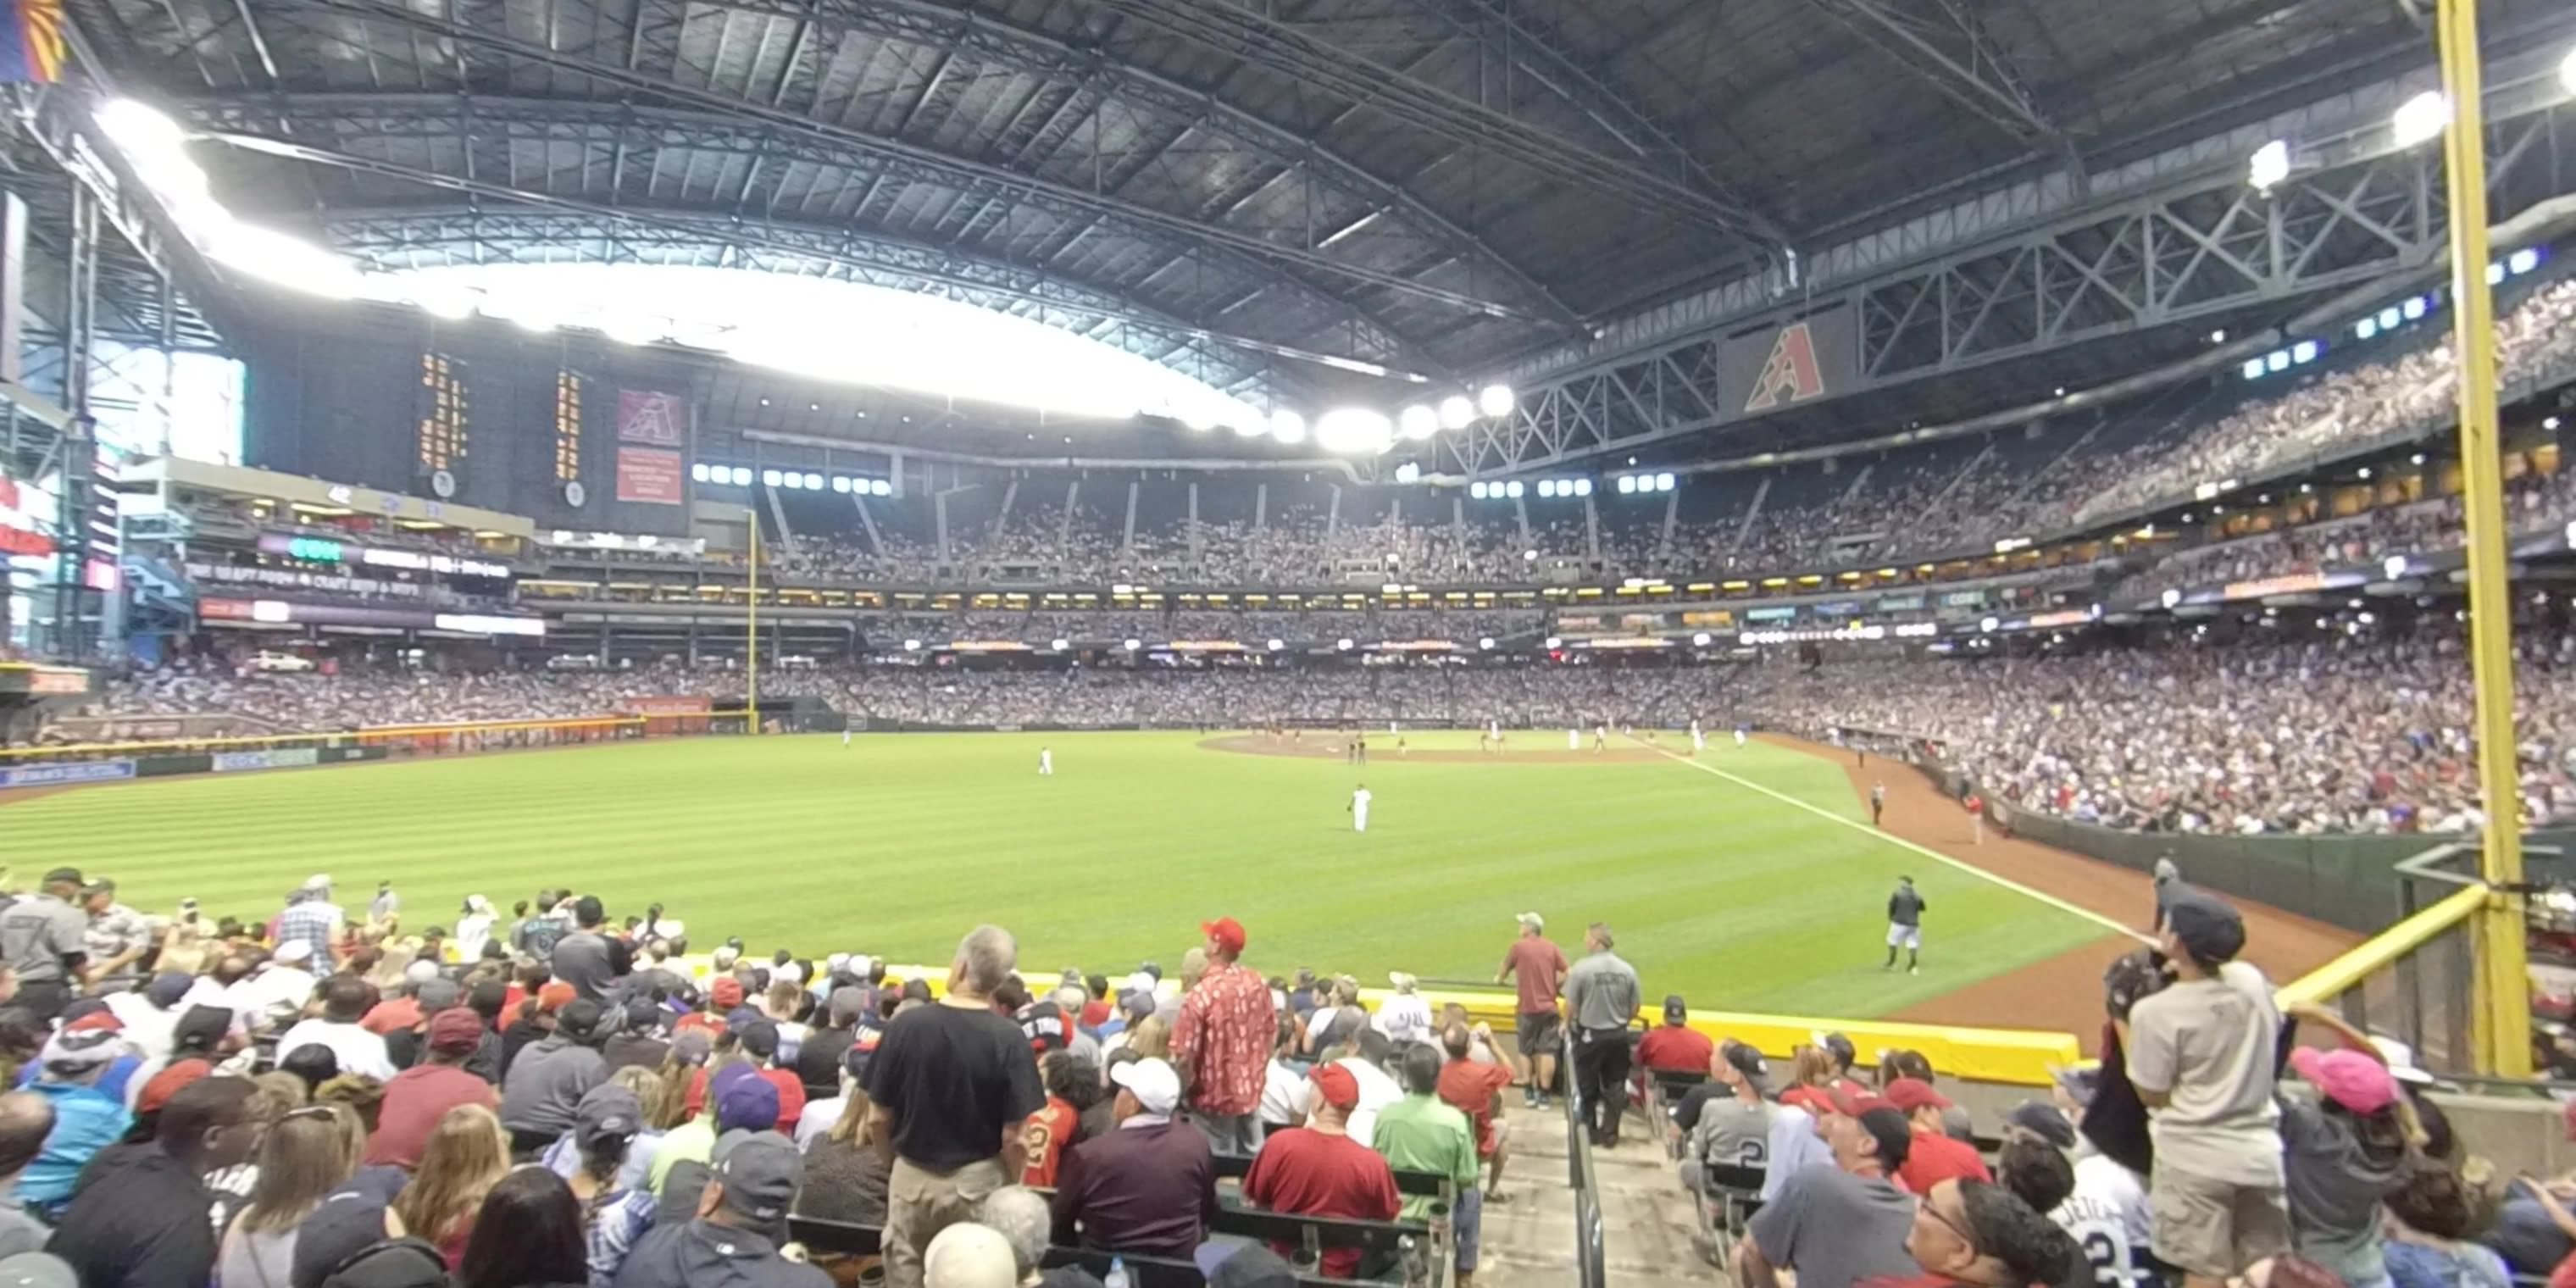 section 139 panoramic seat view  for baseball - chase field